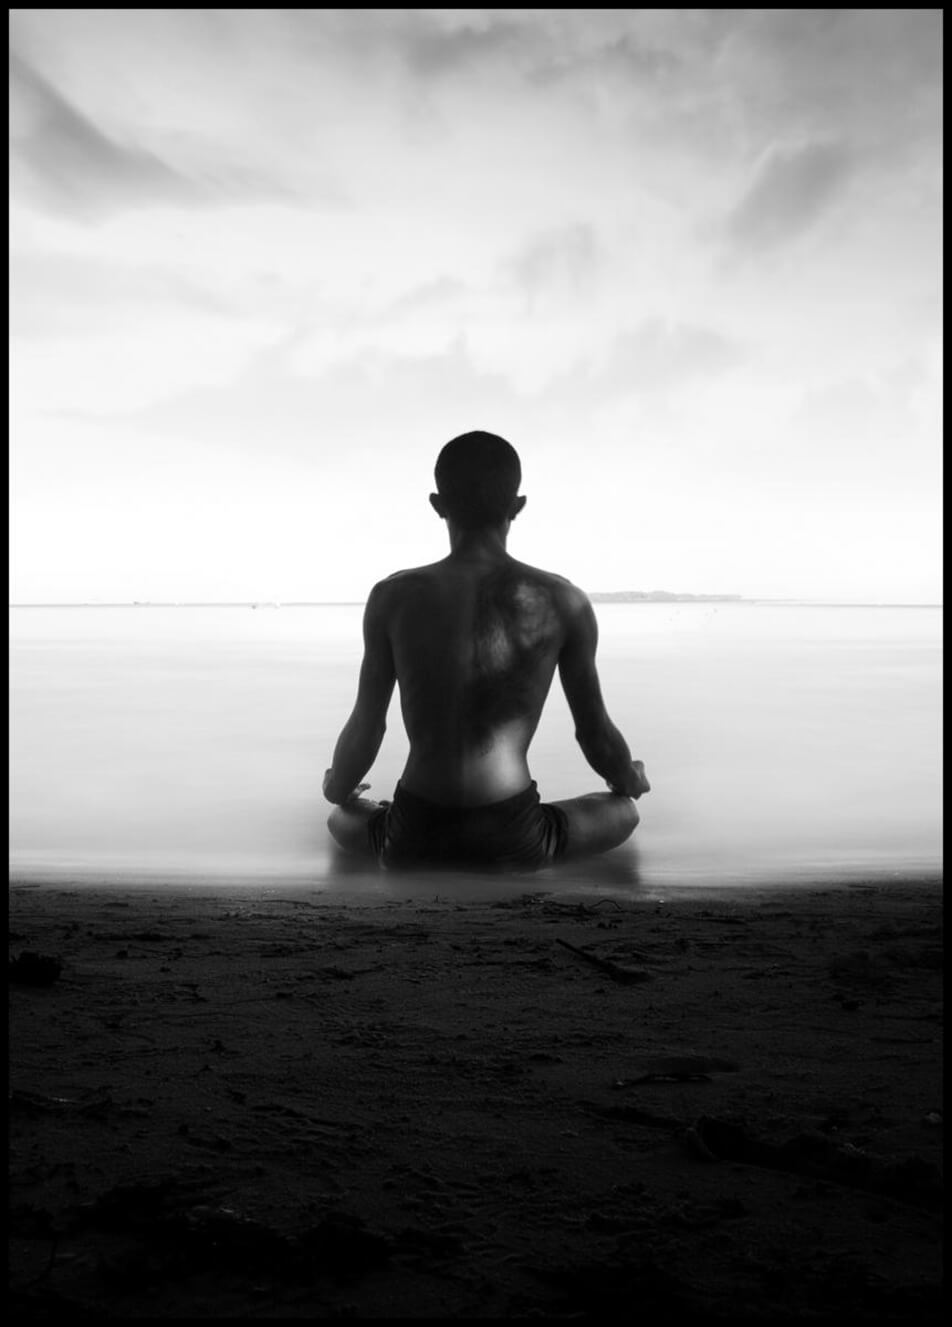 Poster with photo showing a man meditating by the seashore